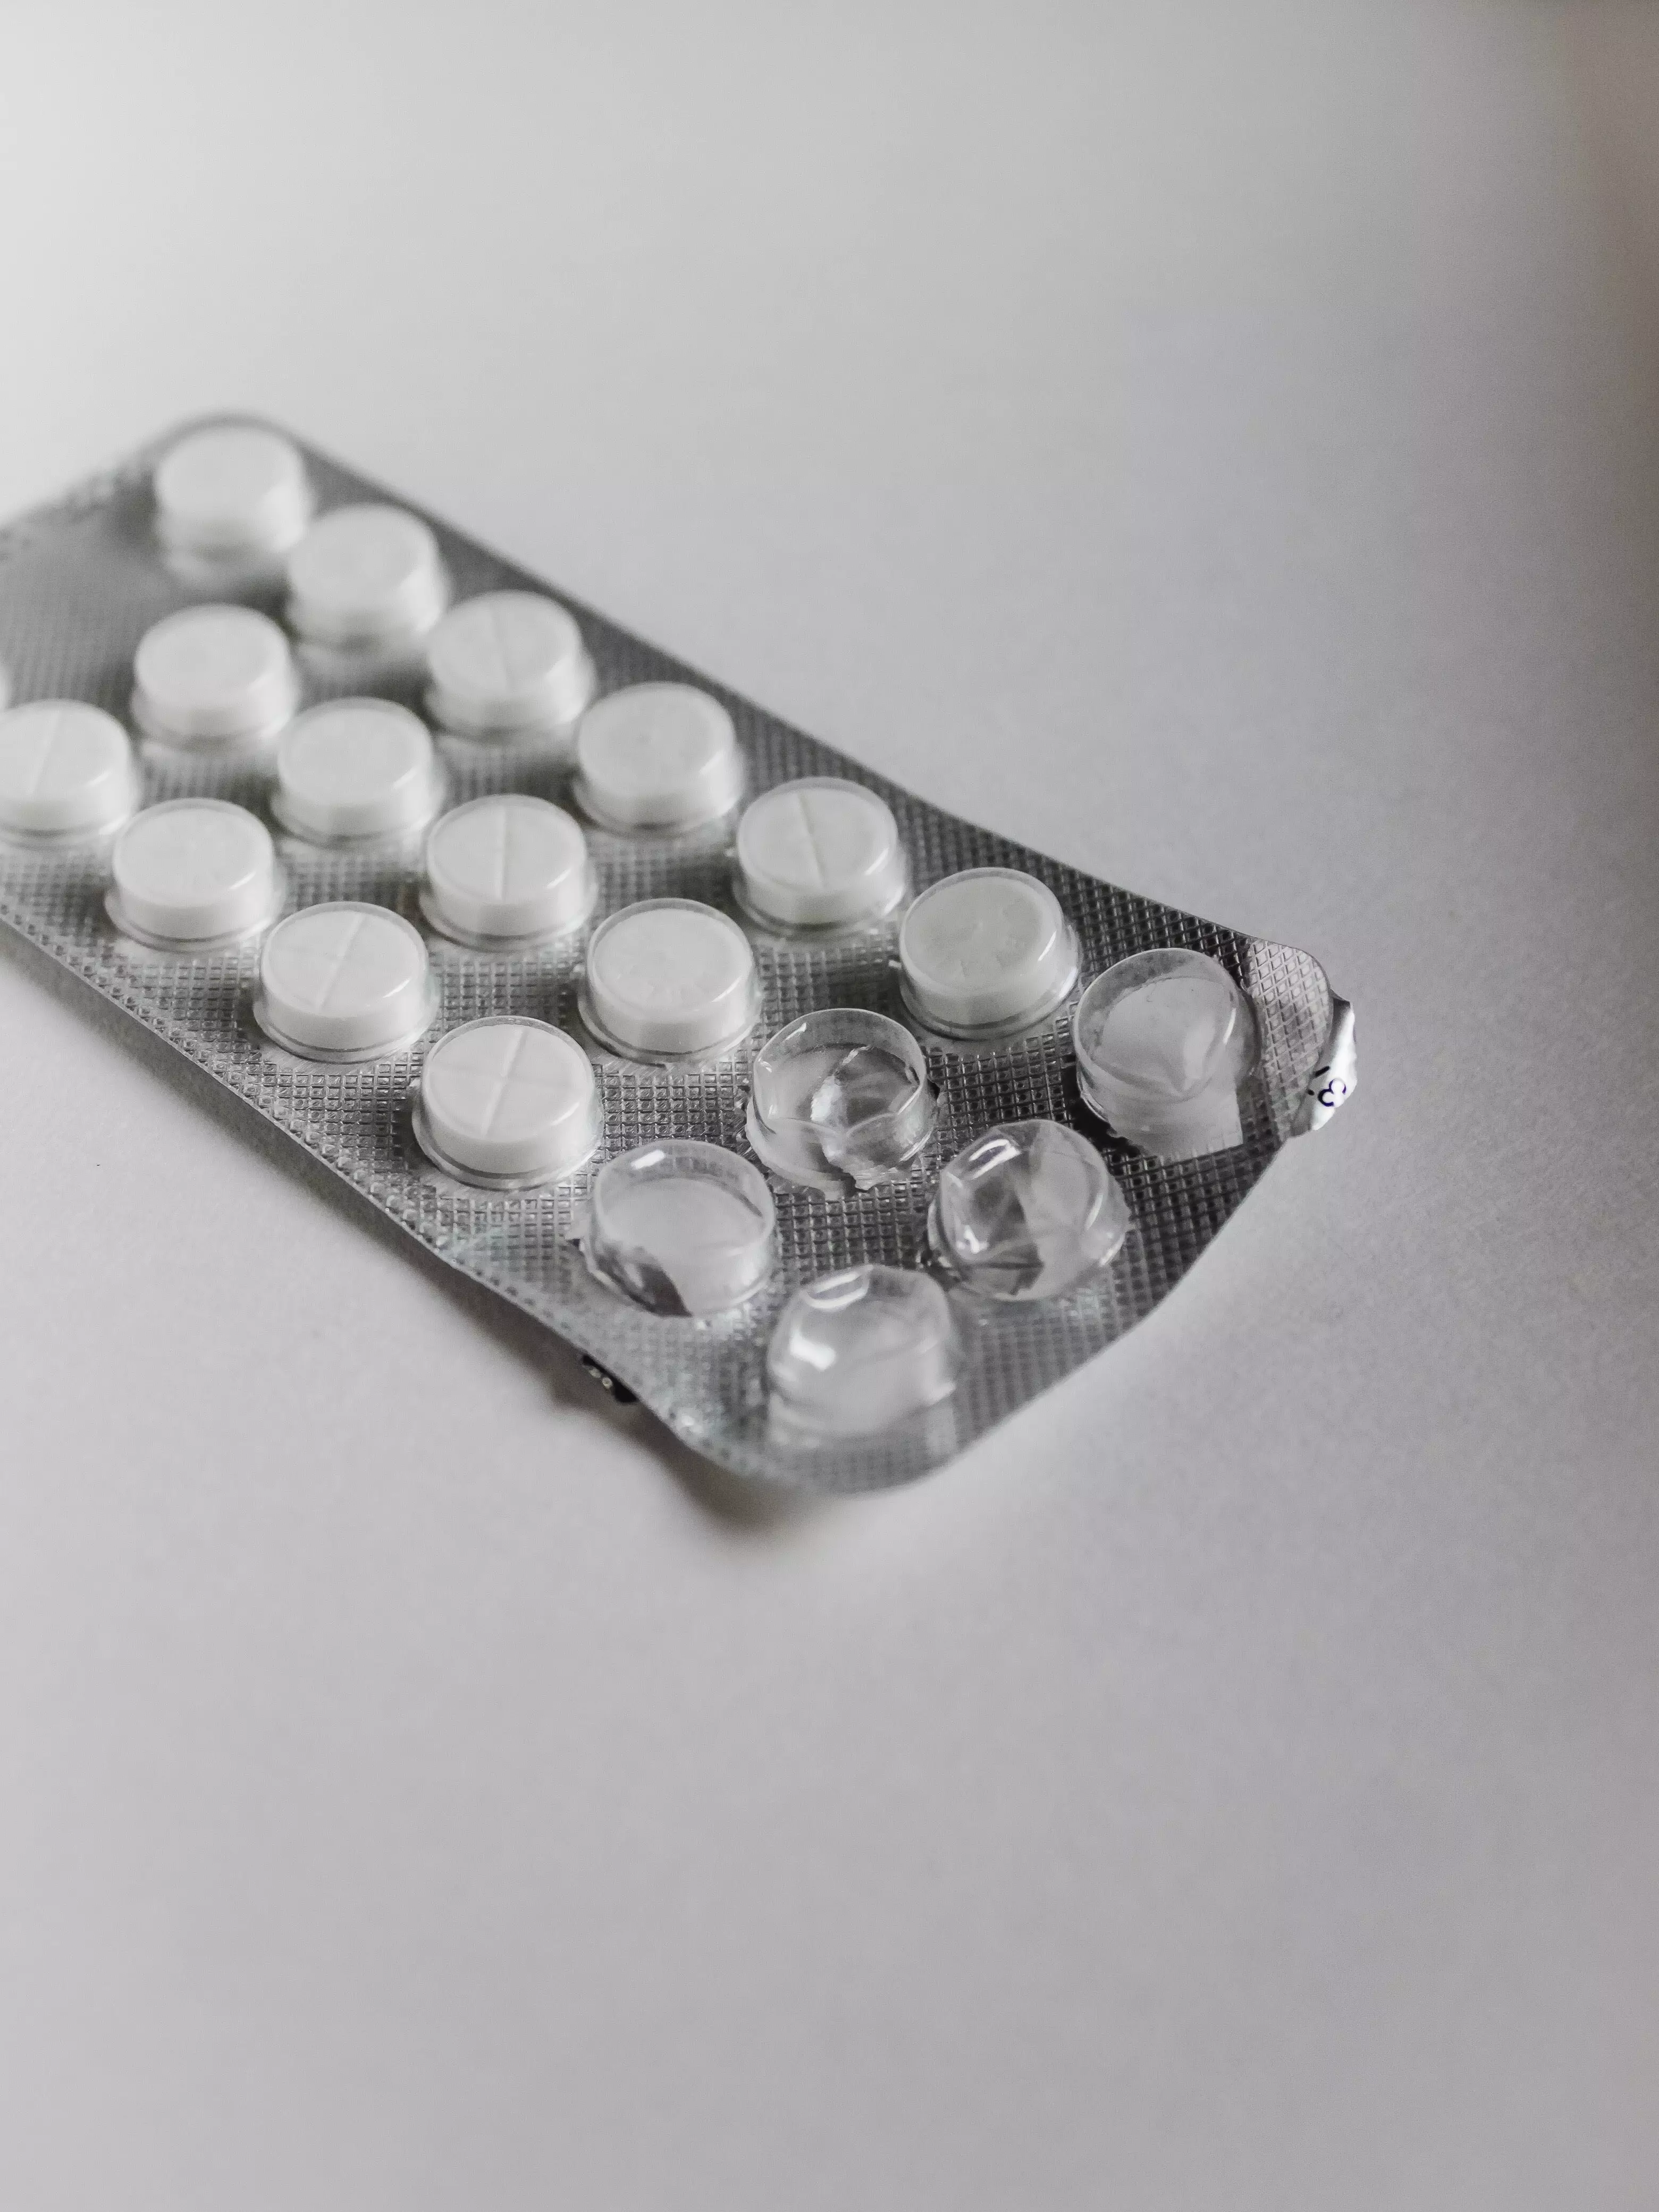 The Bpas wants women to keep the emergency contraception in the cupboard (